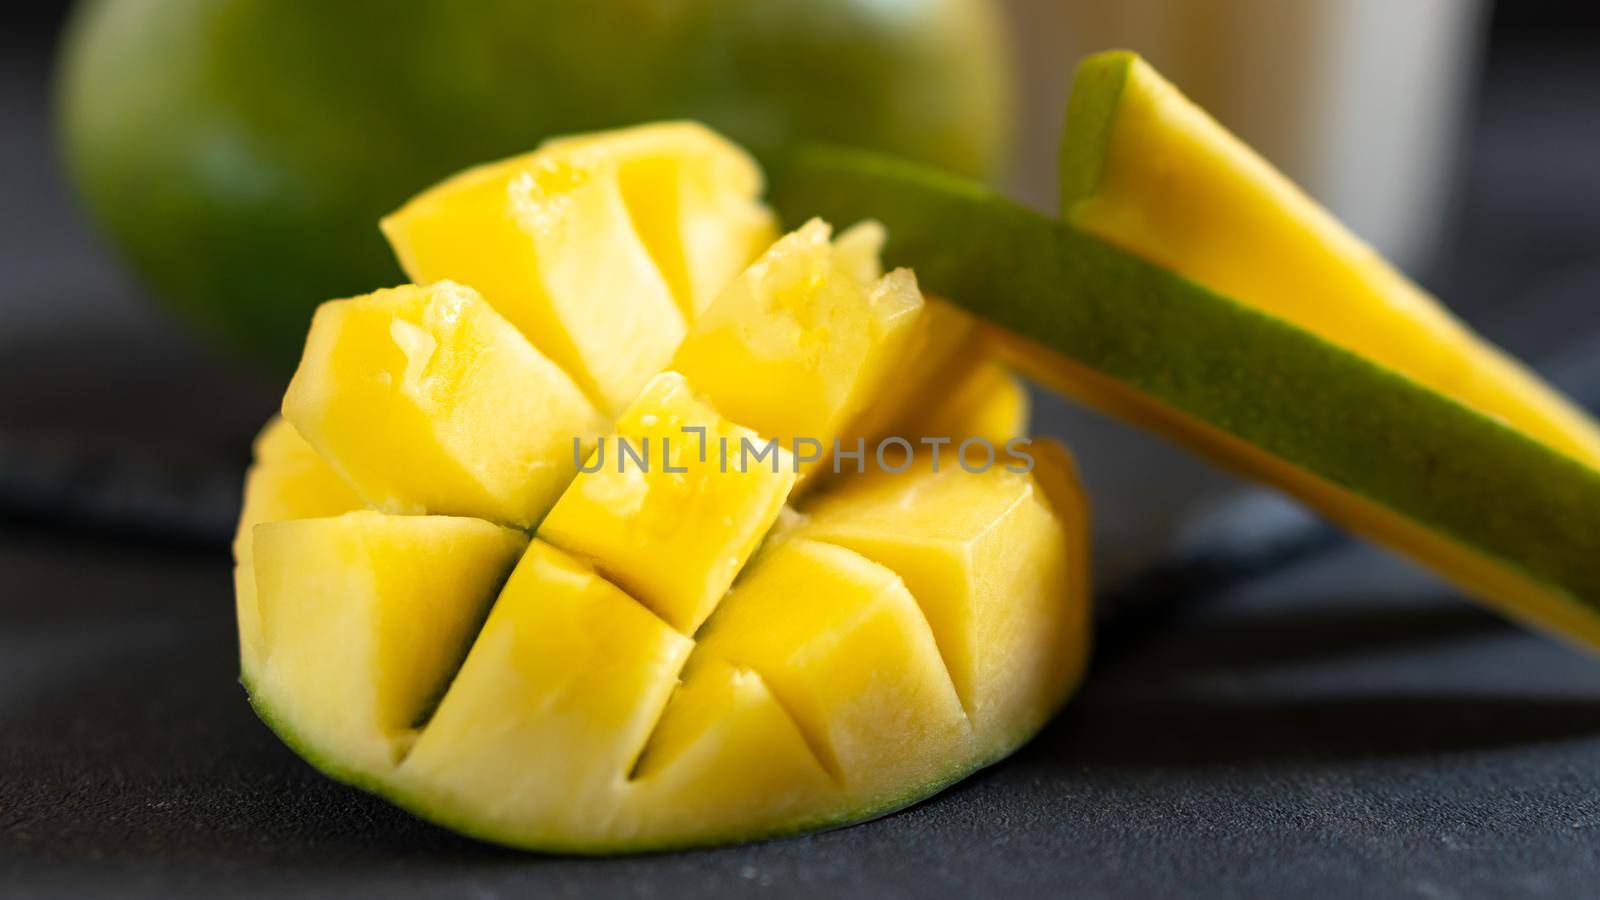 Mango cut on a dark background. Mango in home conditions not neatly cut.